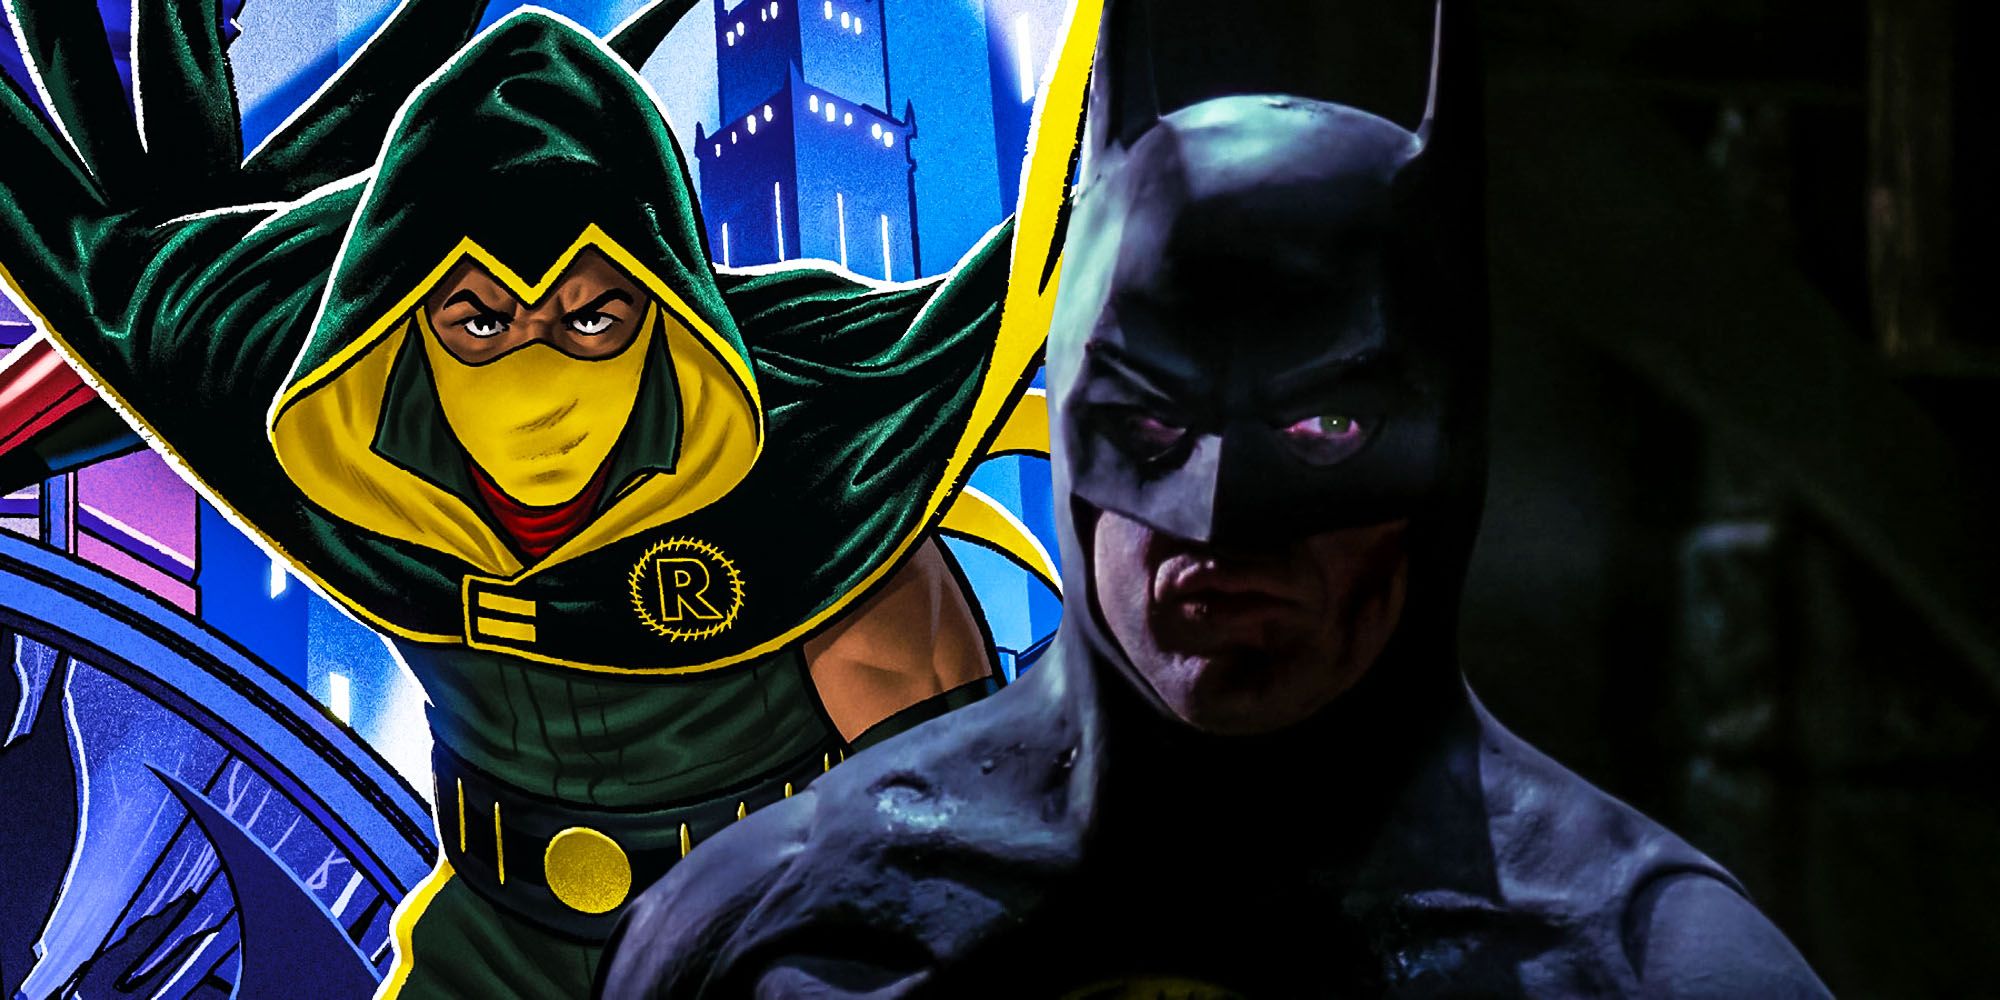 Keaton's 7 Batman Costumes In The Flash Hint At What Happened